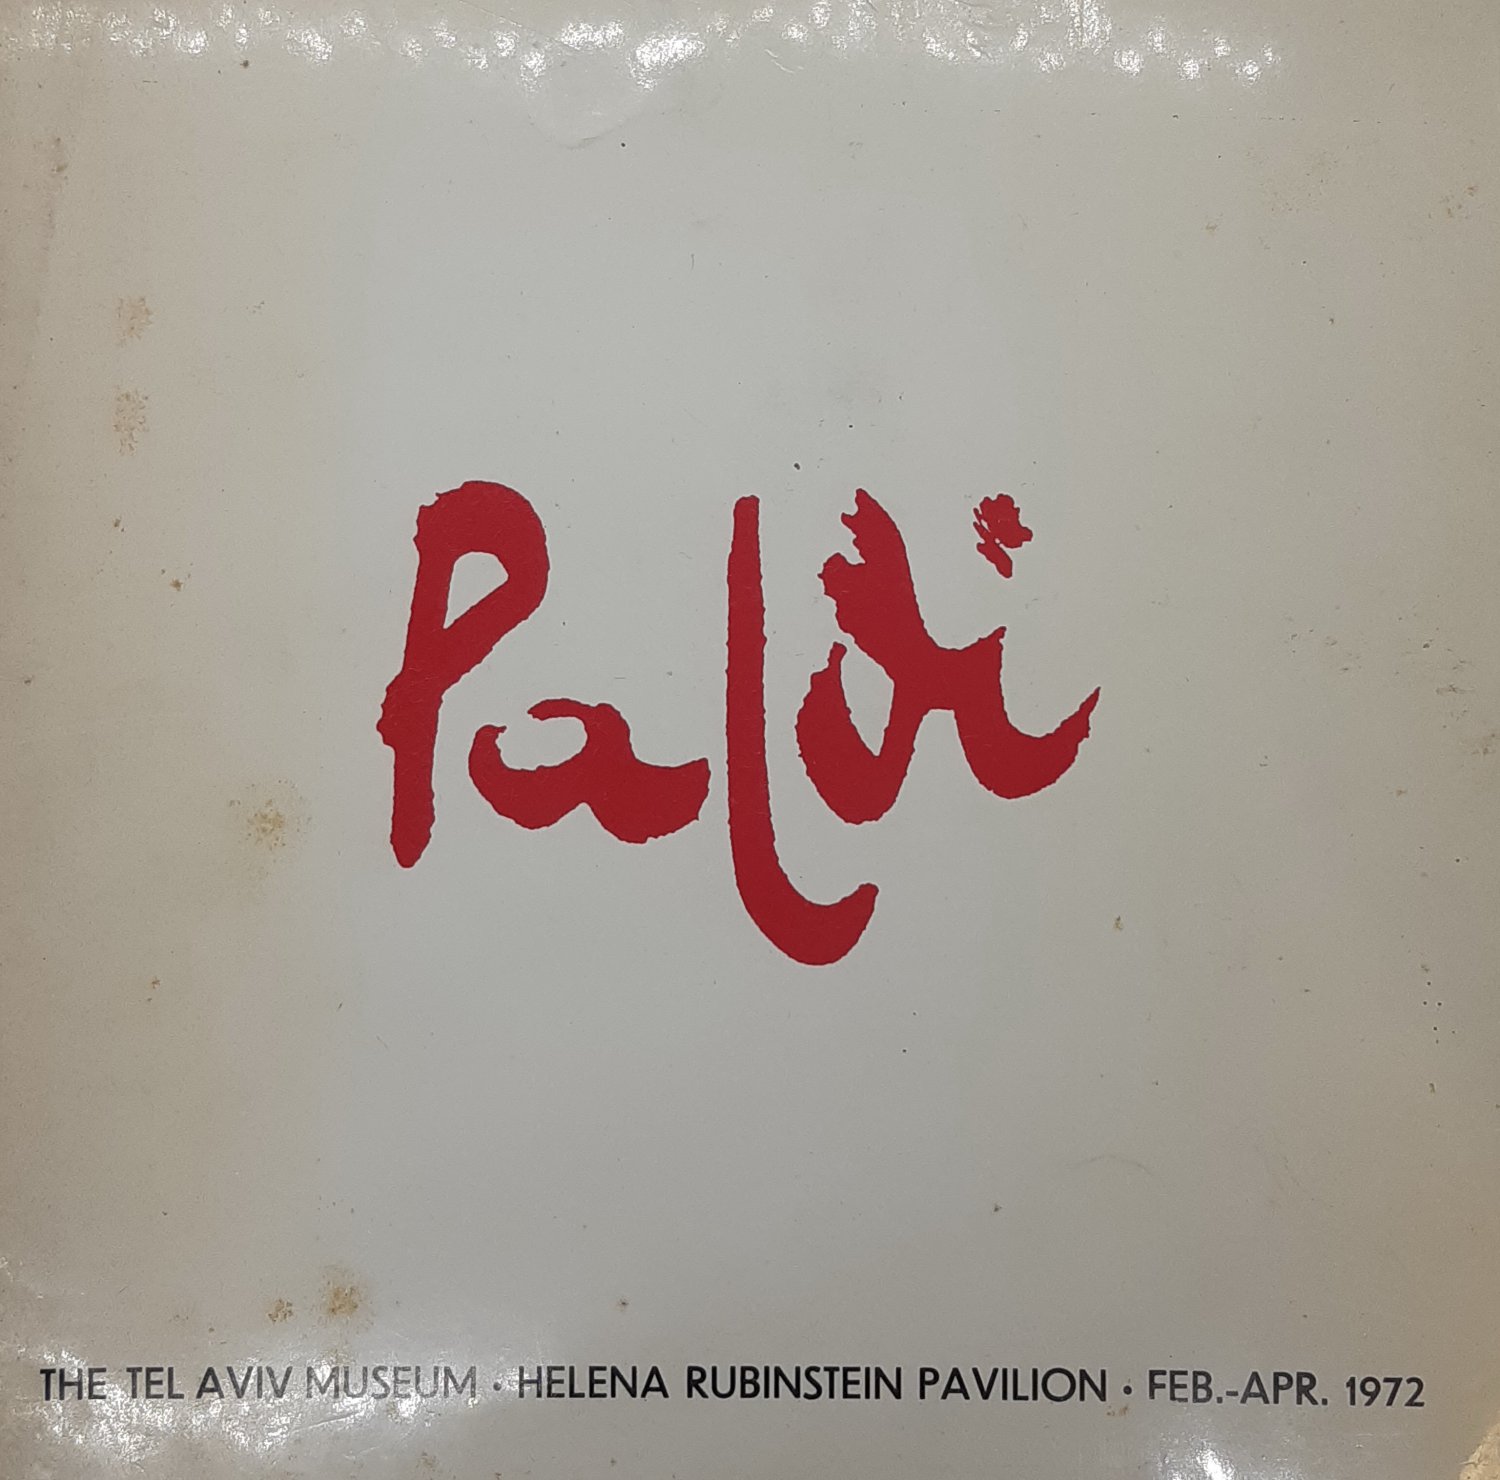 Israel Paldi. Retrospective Exhibition: Paintings-Collages-Reliefs, 1972, in Hebrew, English